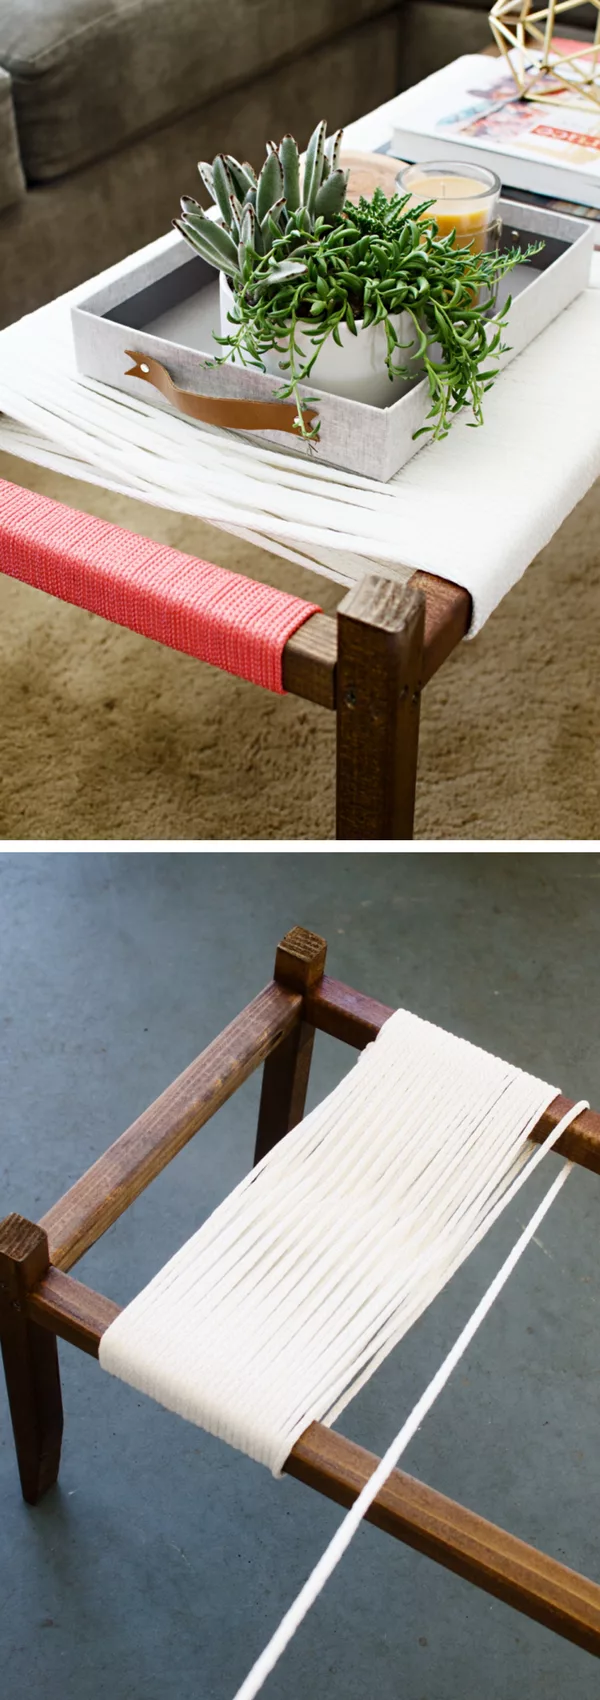 Check out the tutorial on how to make a DIY woven bench